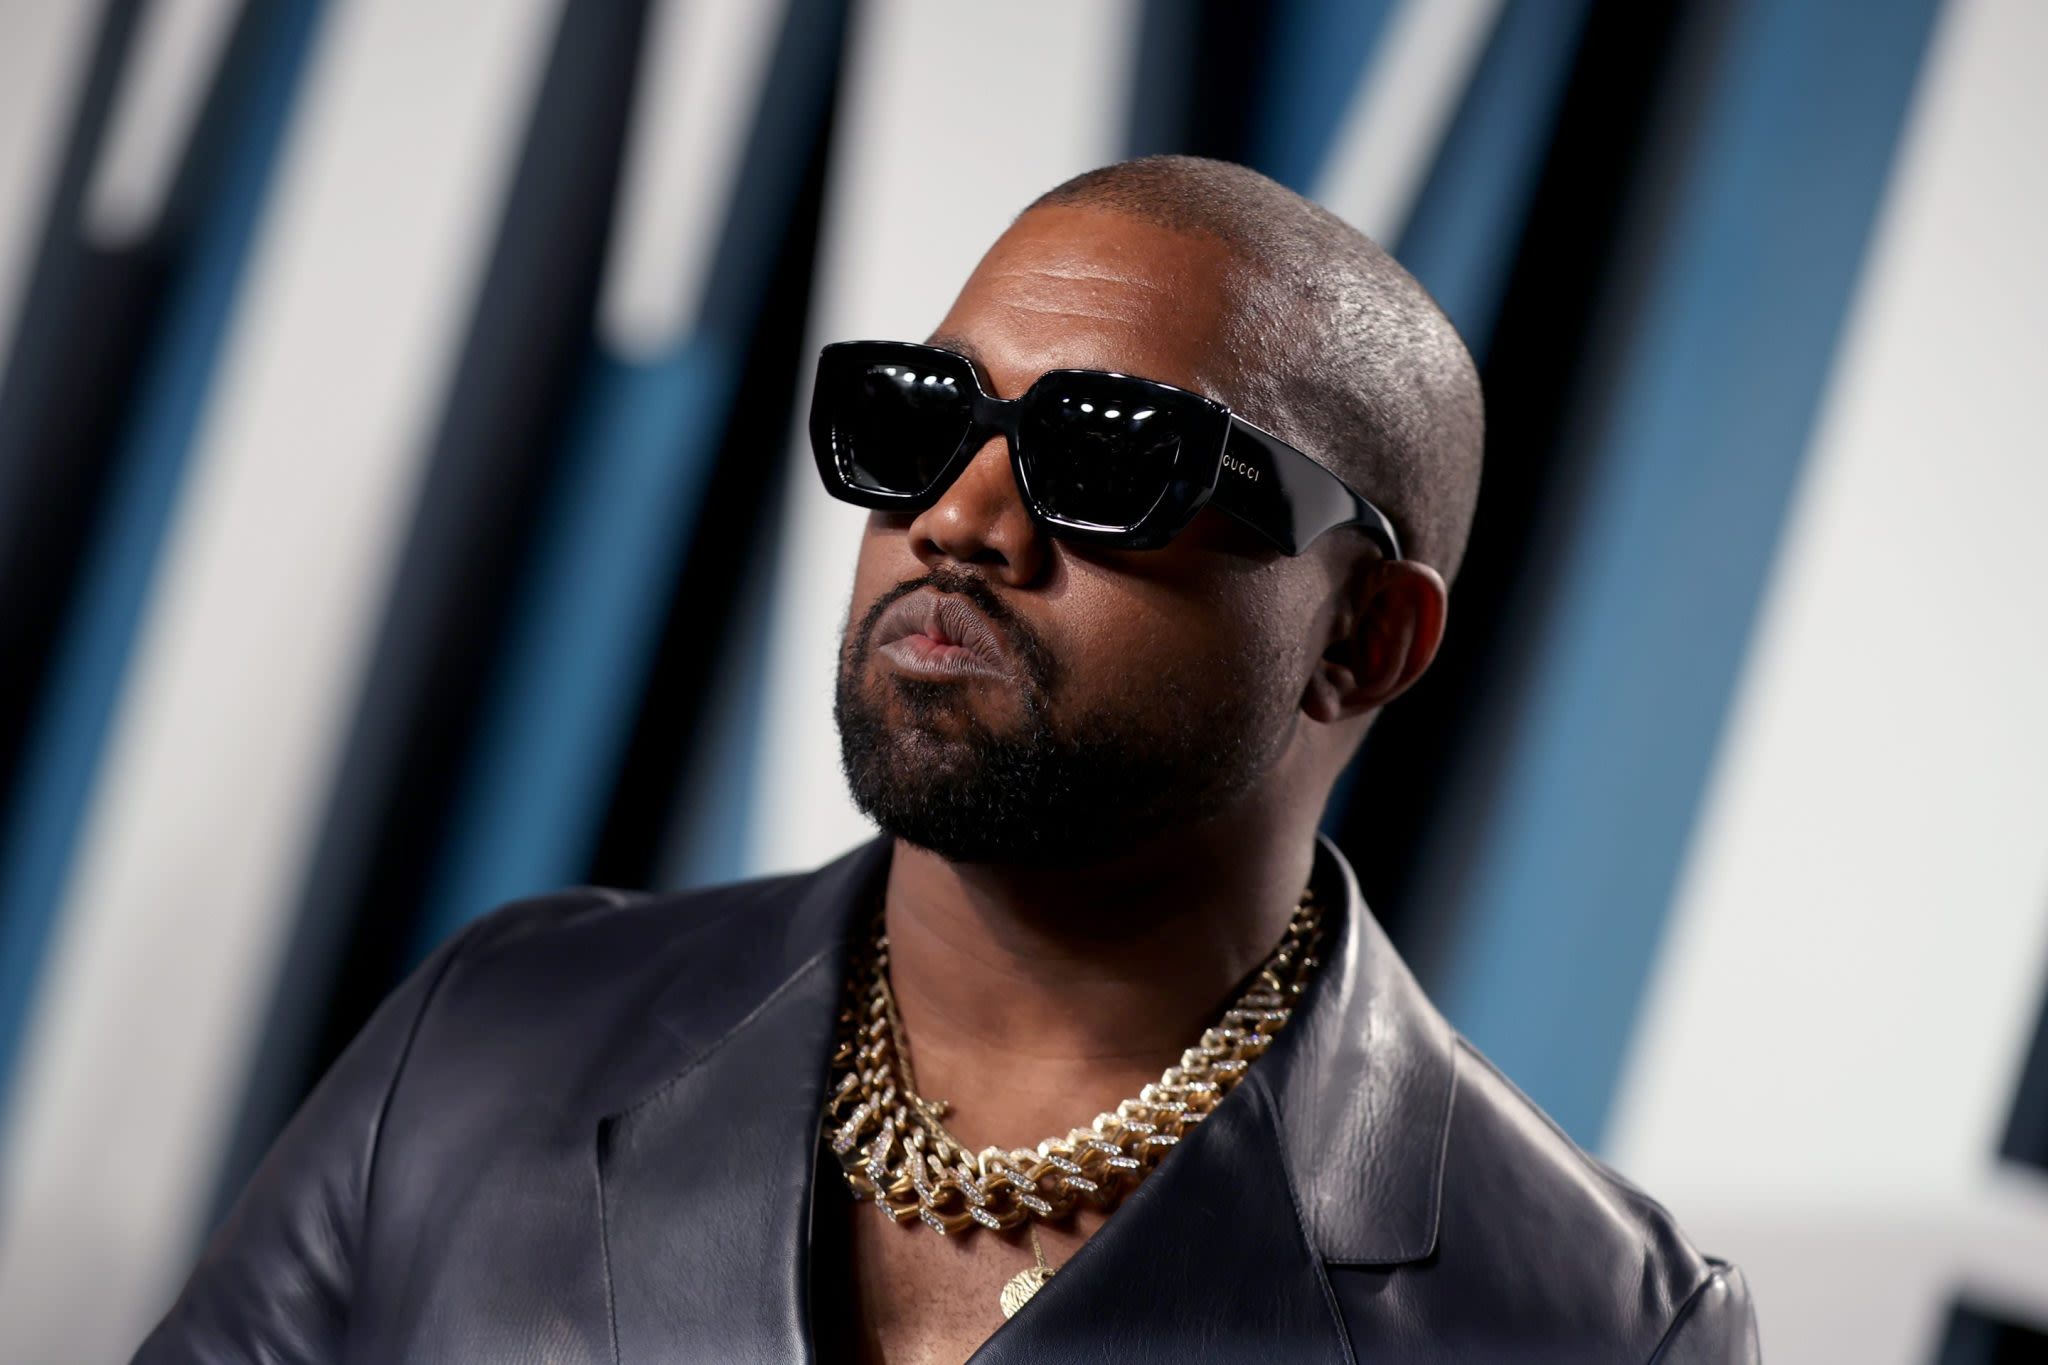 Luxury home prices have gotten so unwieldy that Ye, formerly Kanye West, had to slash the price of his Malibu mansion by around $14 million